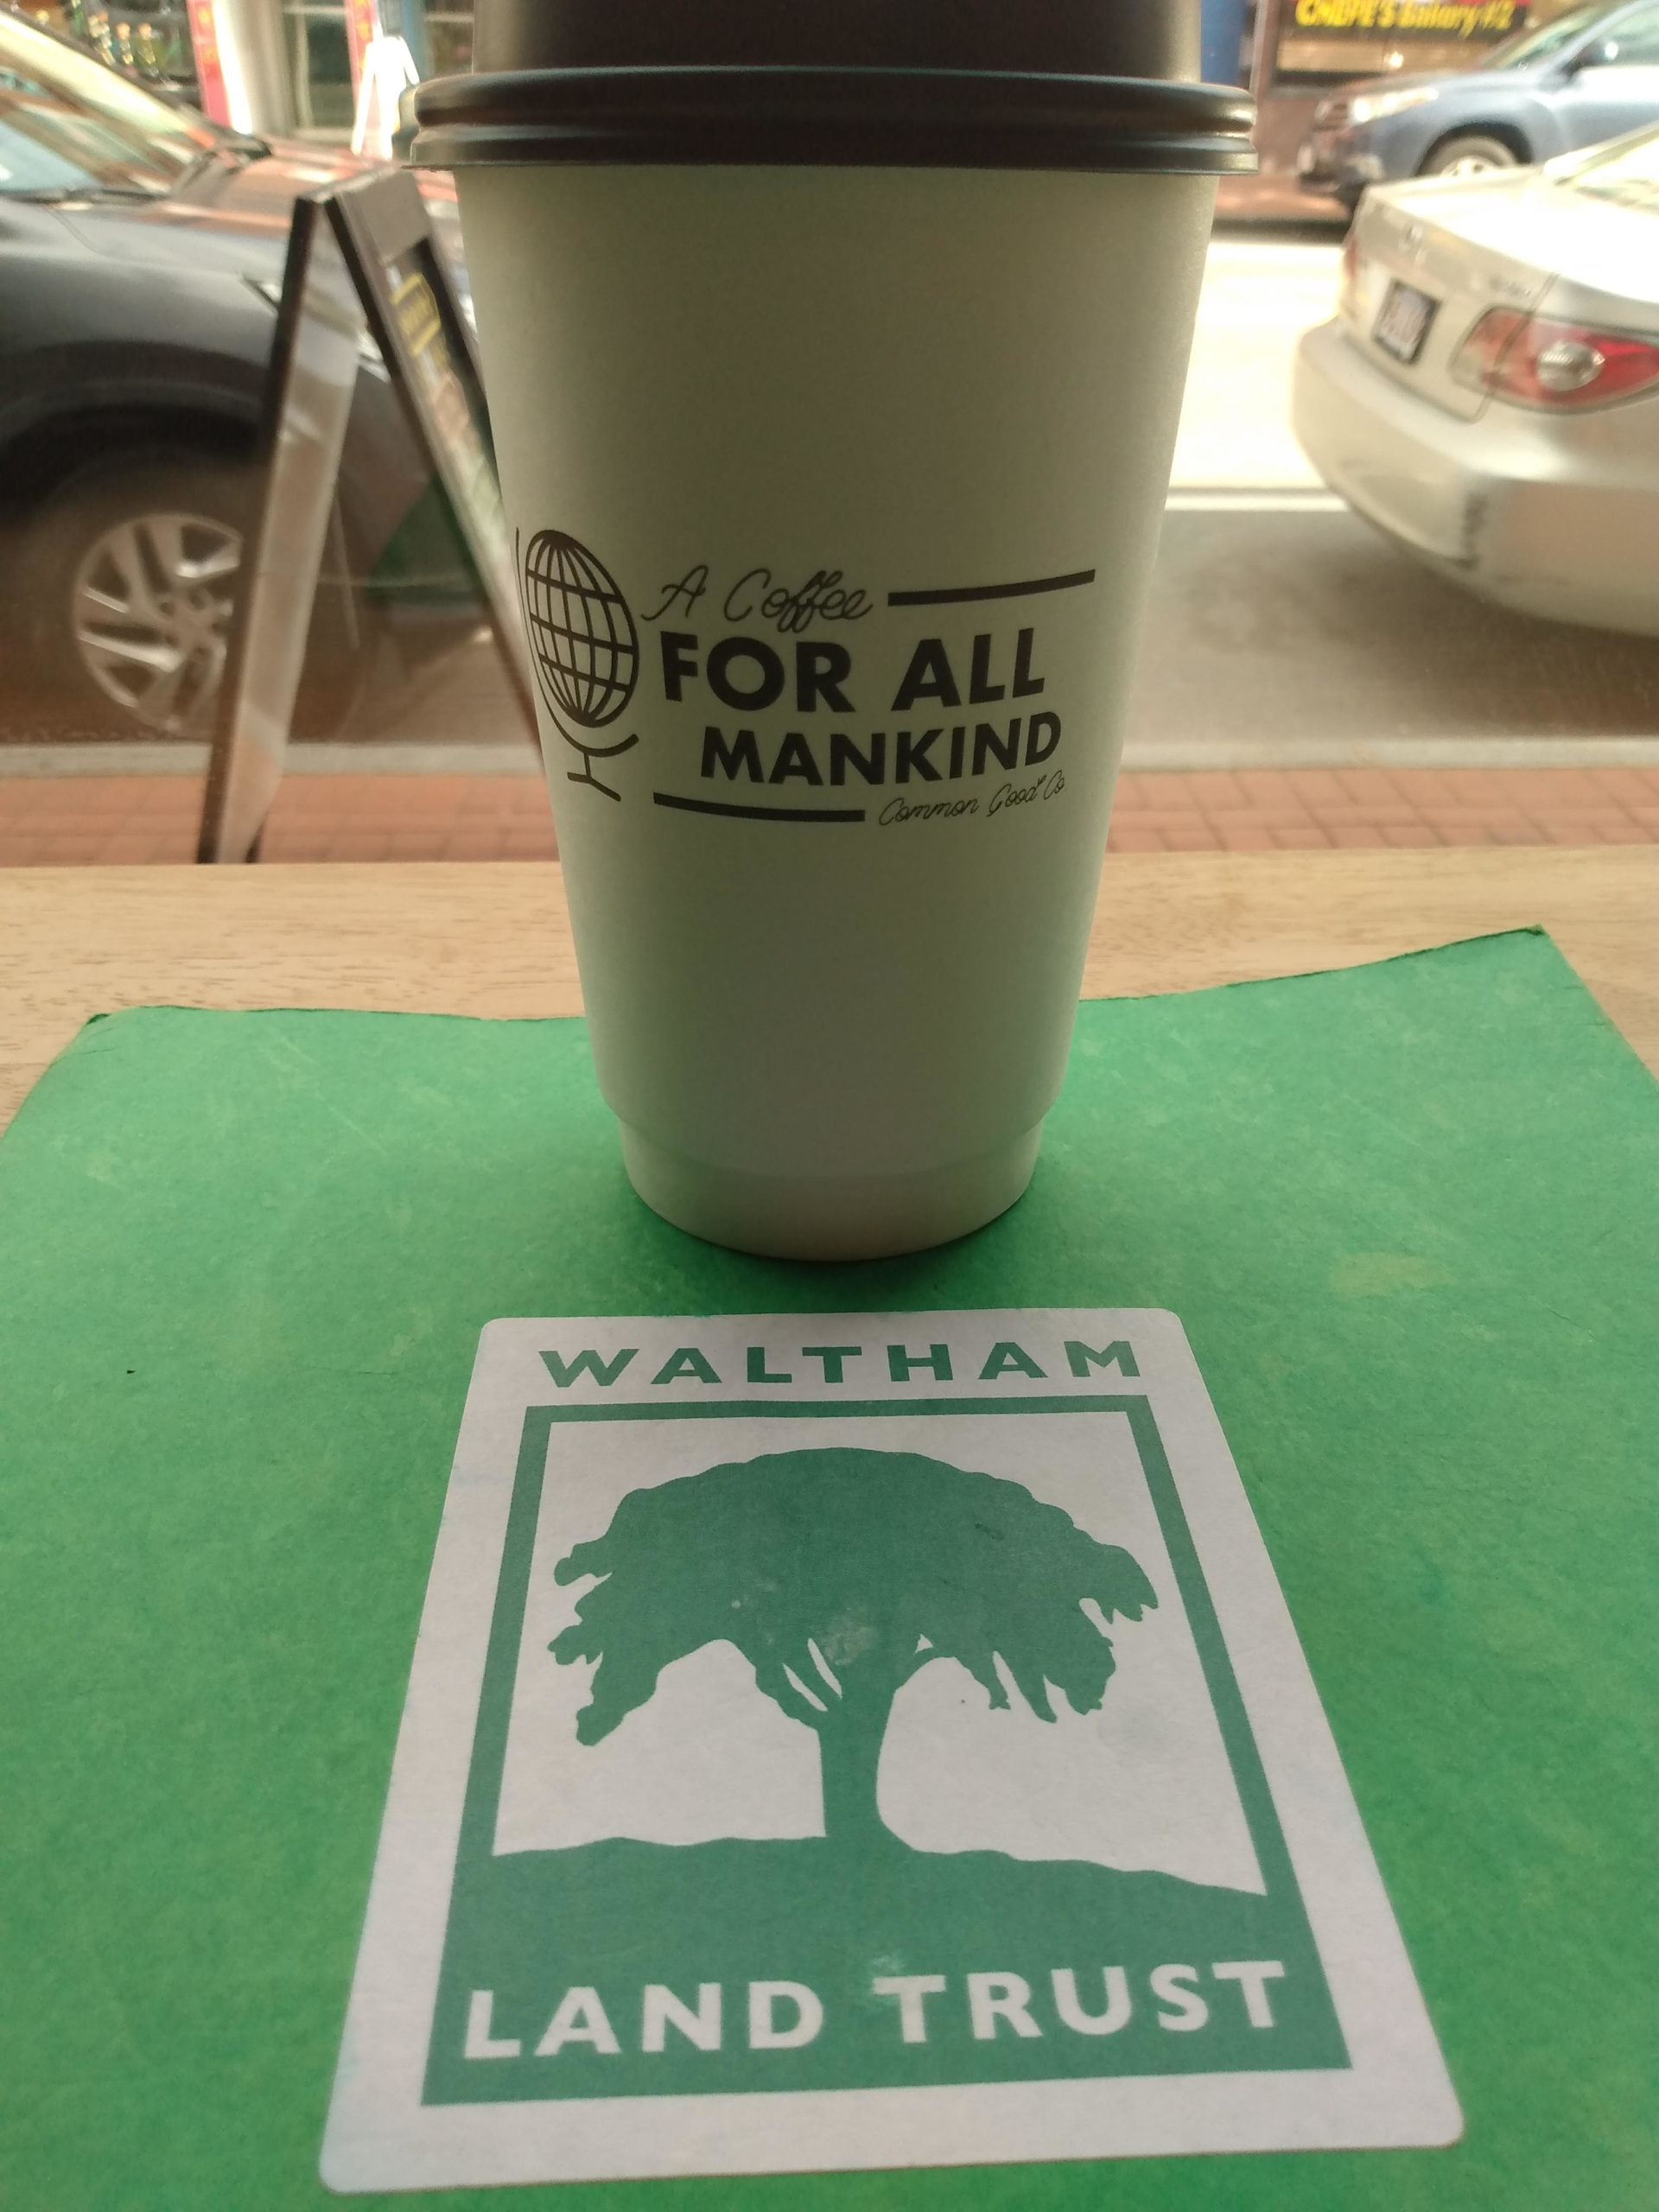 Common Good cafe coffee mug is placed on a table above an image of the Waltham Land Trust Logo